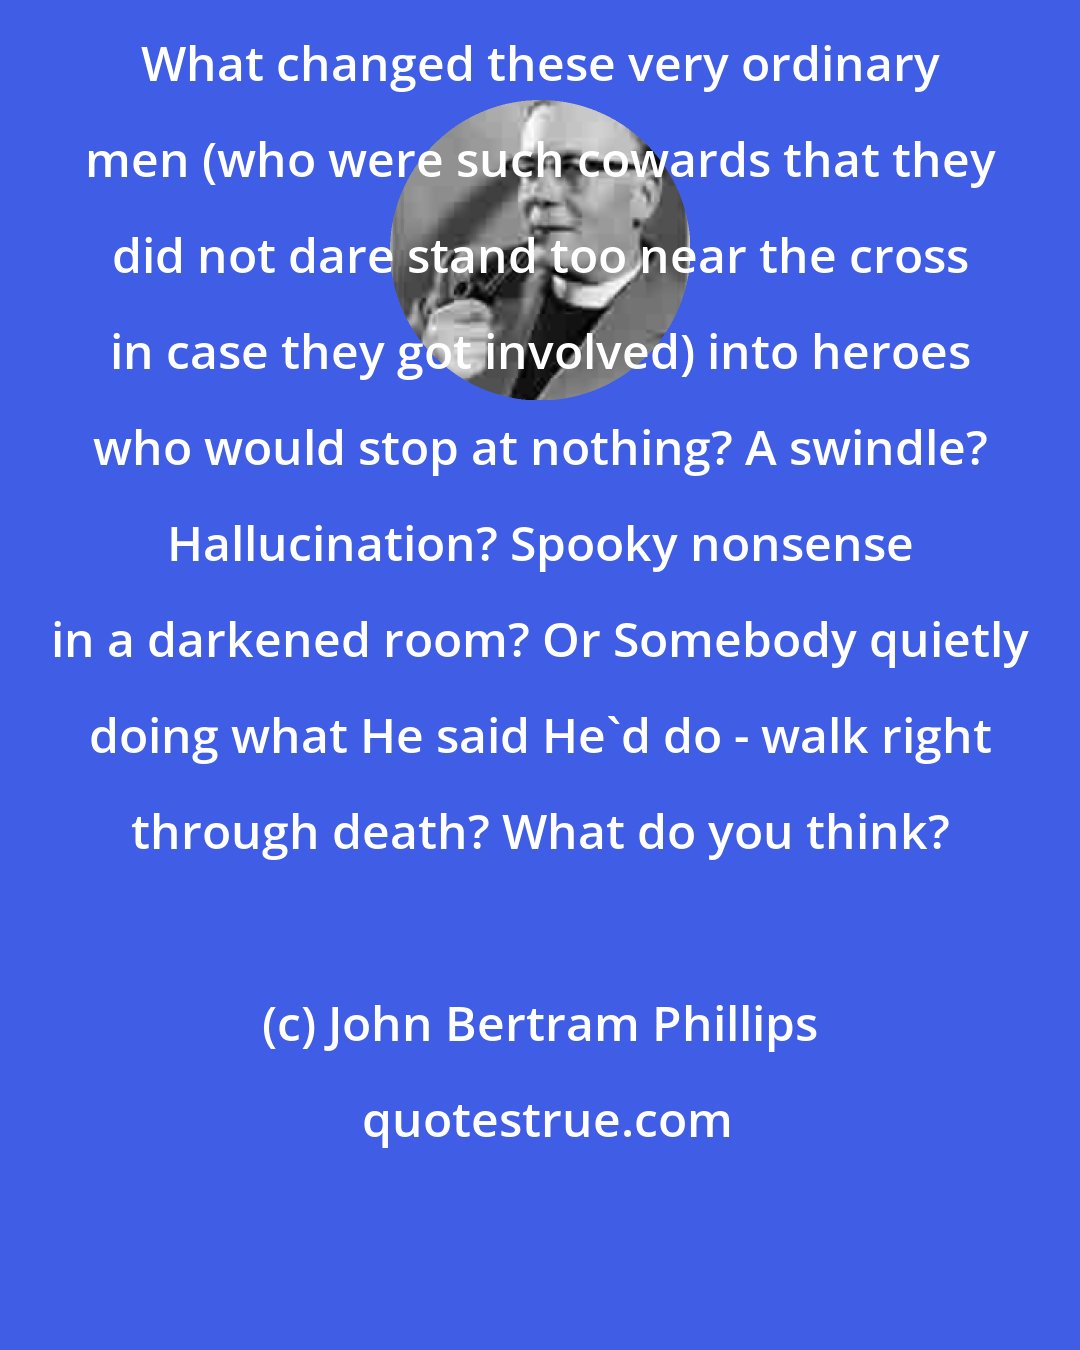 John Bertram Phillips: What changed these very ordinary men (who were such cowards that they did not dare stand too near the cross in case they got involved) into heroes who would stop at nothing? A swindle? Hallucination? Spooky nonsense in a darkened room? Or Somebody quietly doing what He said He'd do - walk right through death? What do you think?